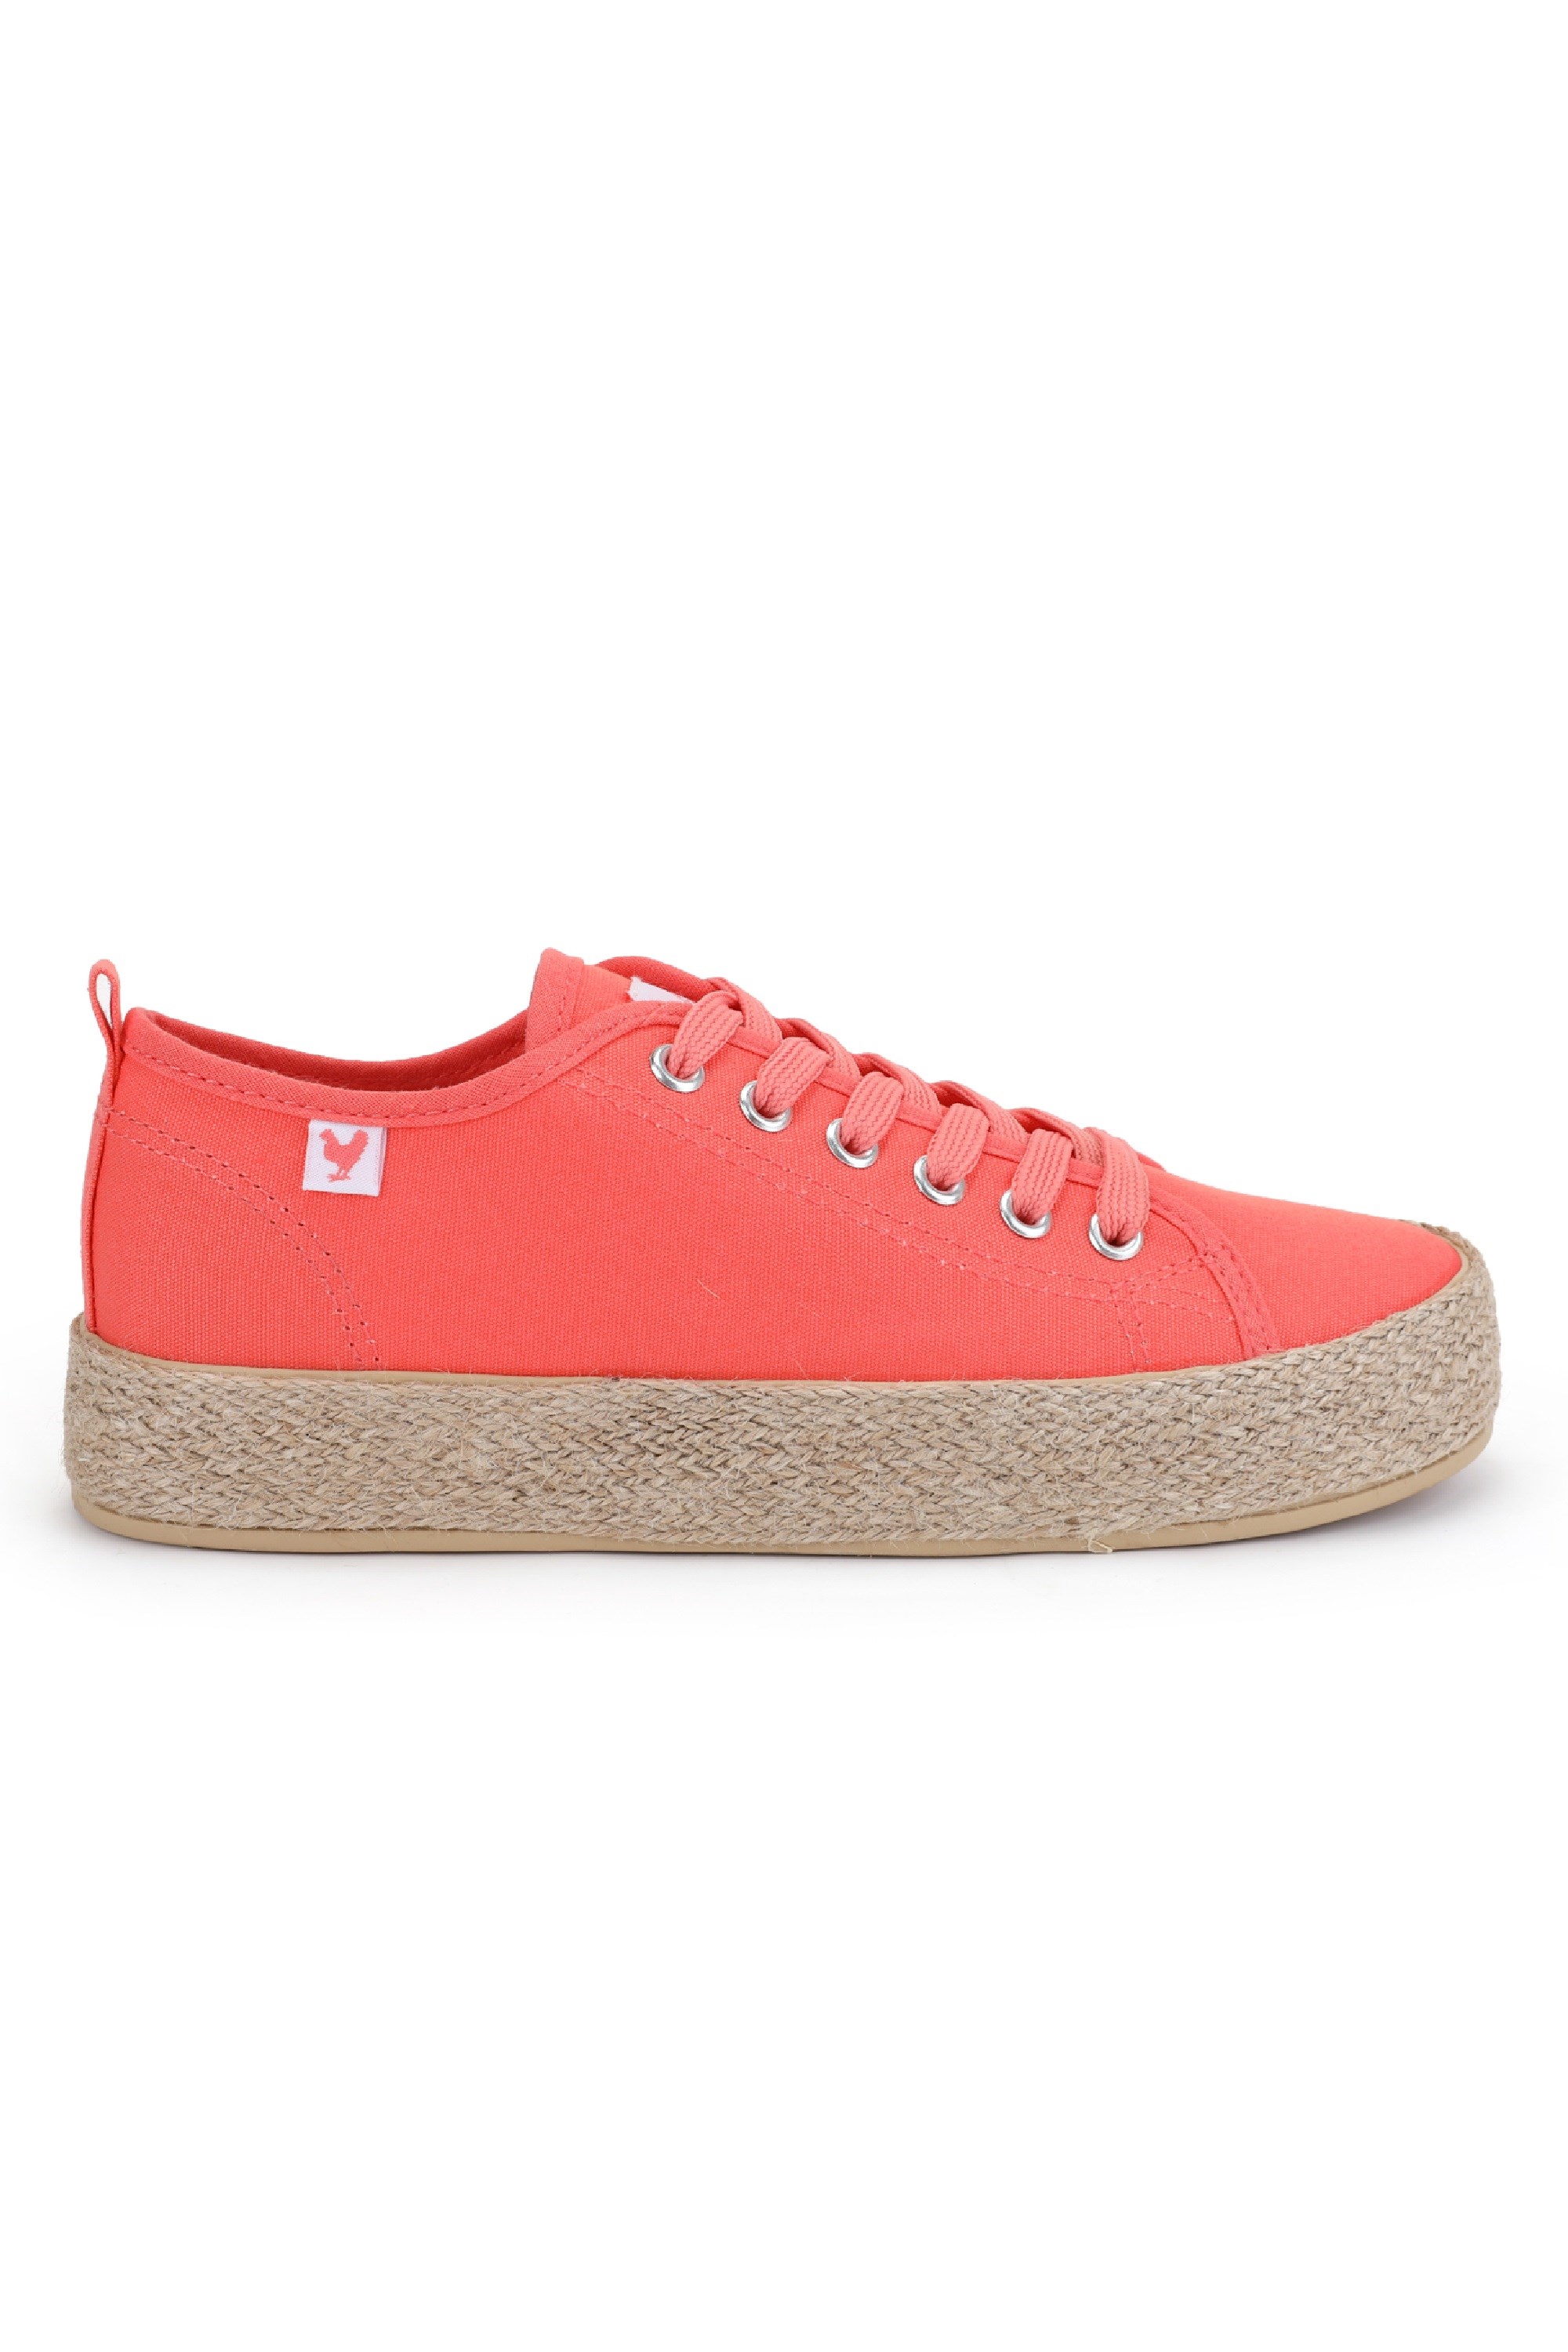 Canvas Lace-Up Womens Espadrille Sneakers -